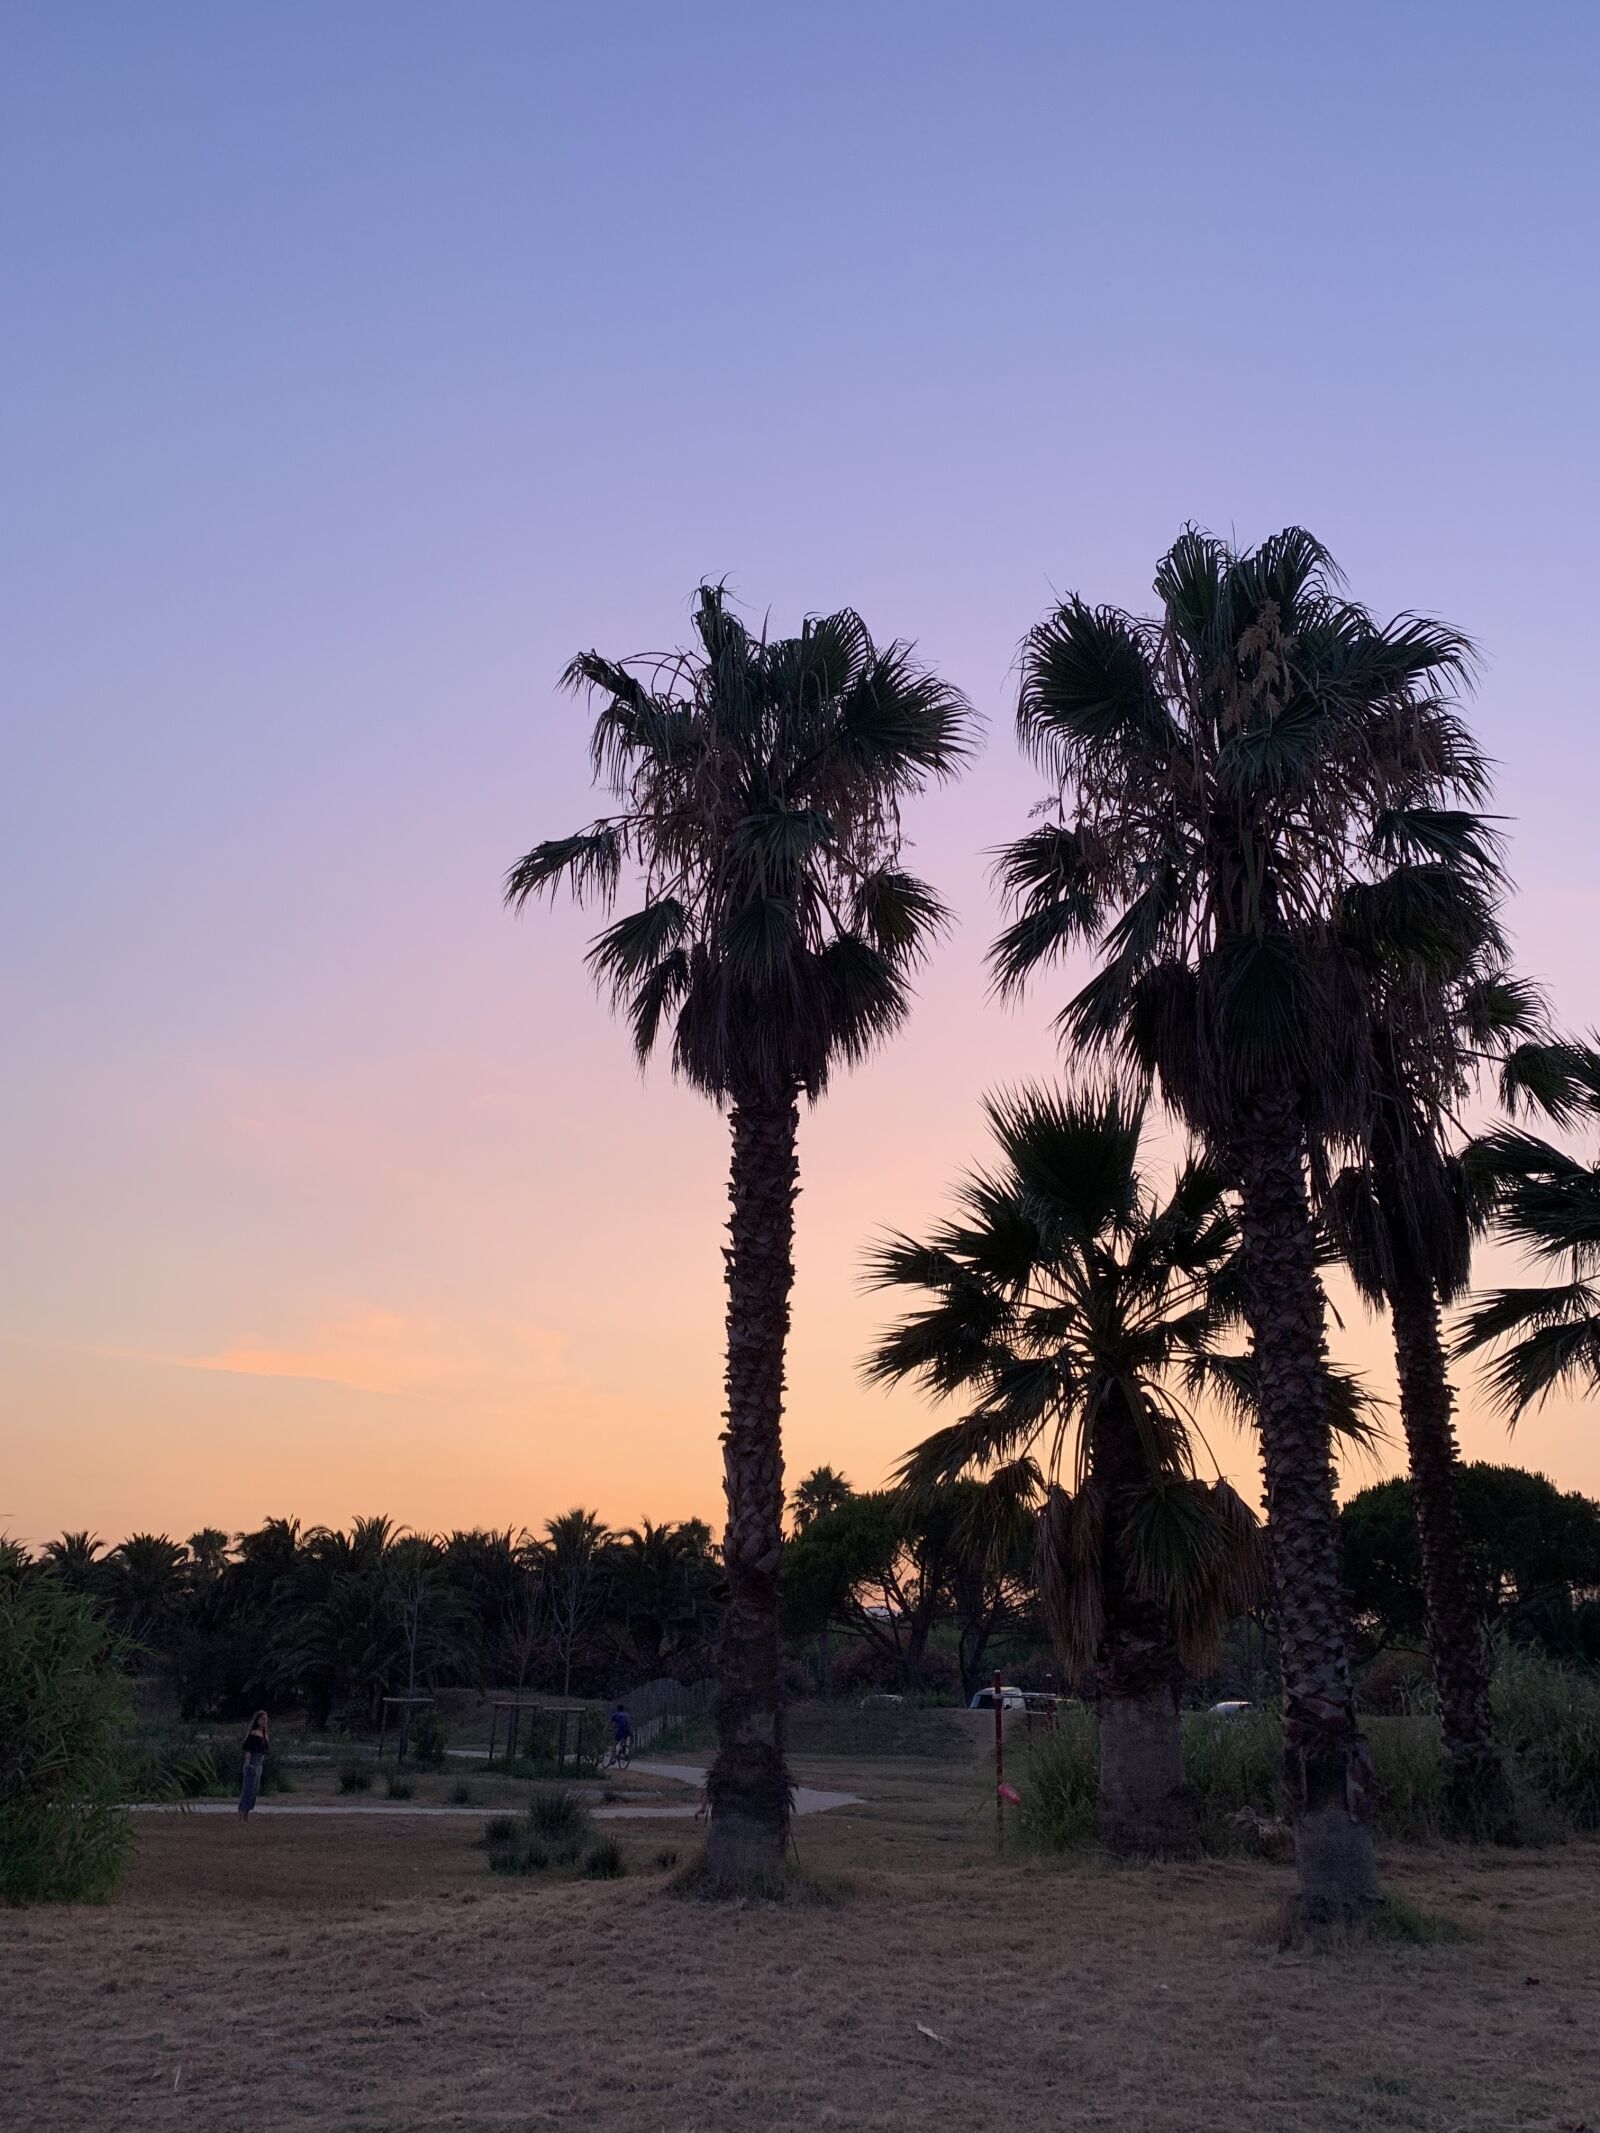 Apple iPhone XR sample photo. Sunset, palm trees, palm photography